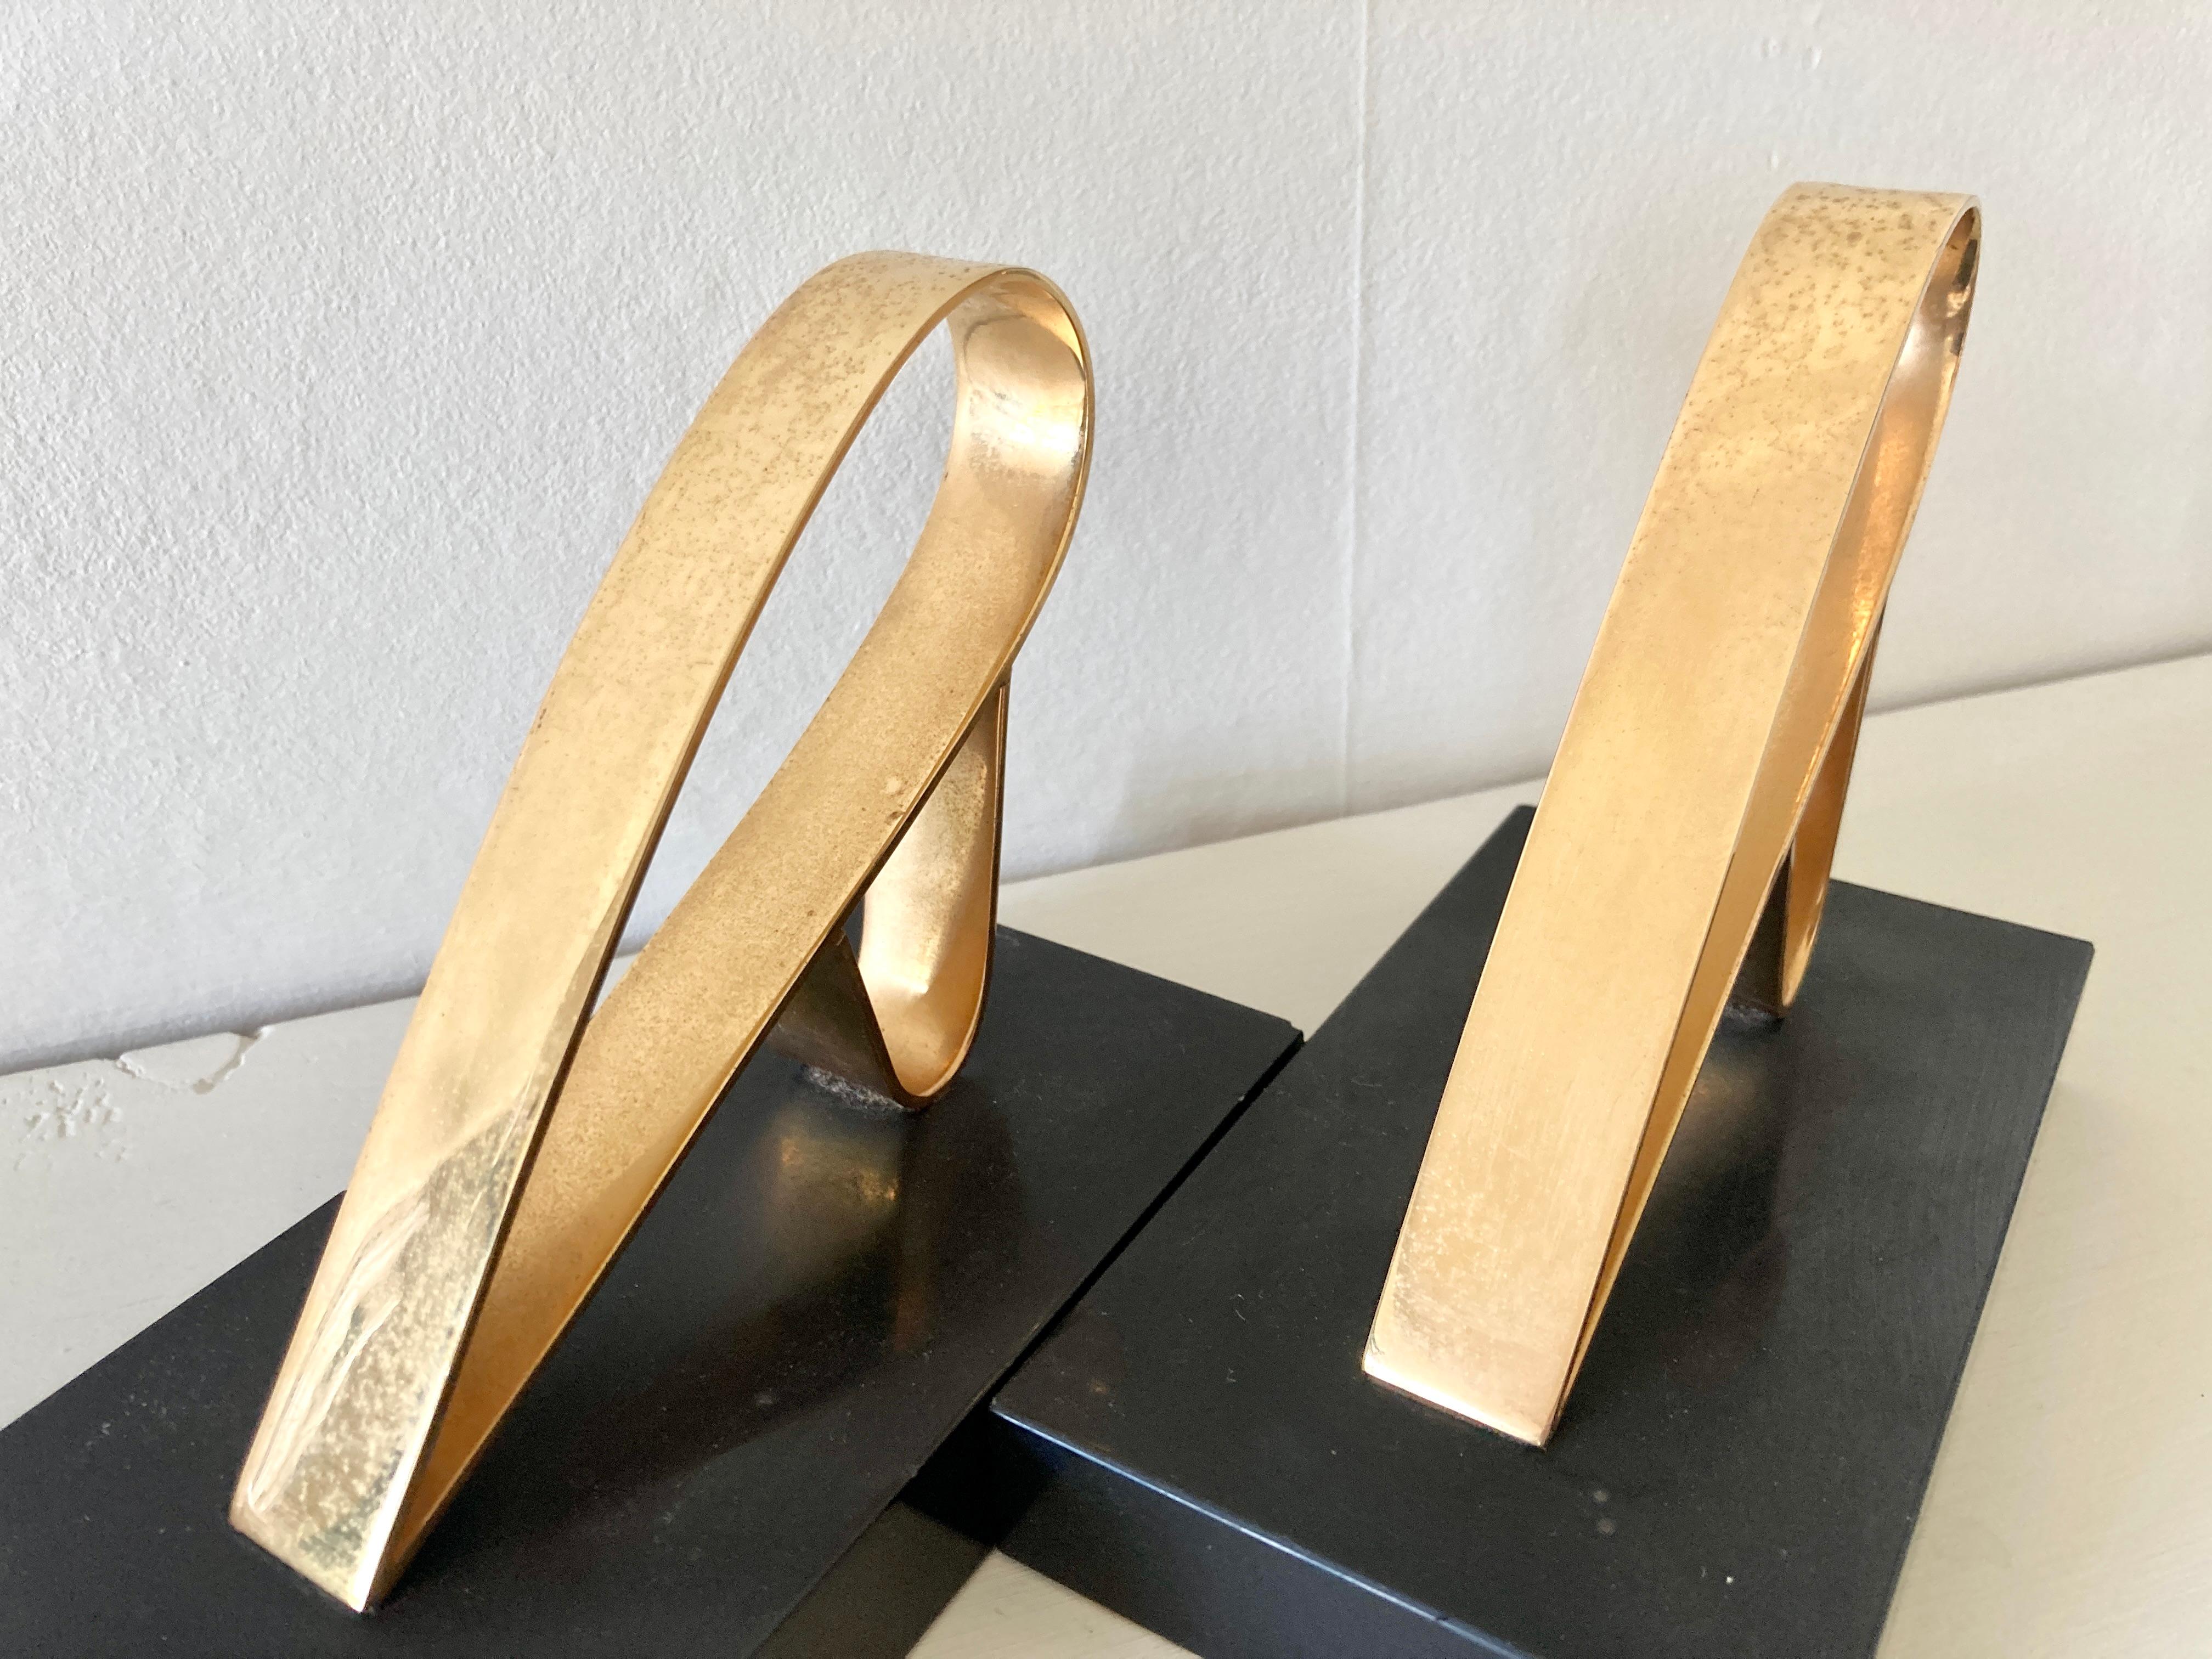 20th Century Art Deco Modernist Bookends in Marble & Gold Plate by Gold Starry, France